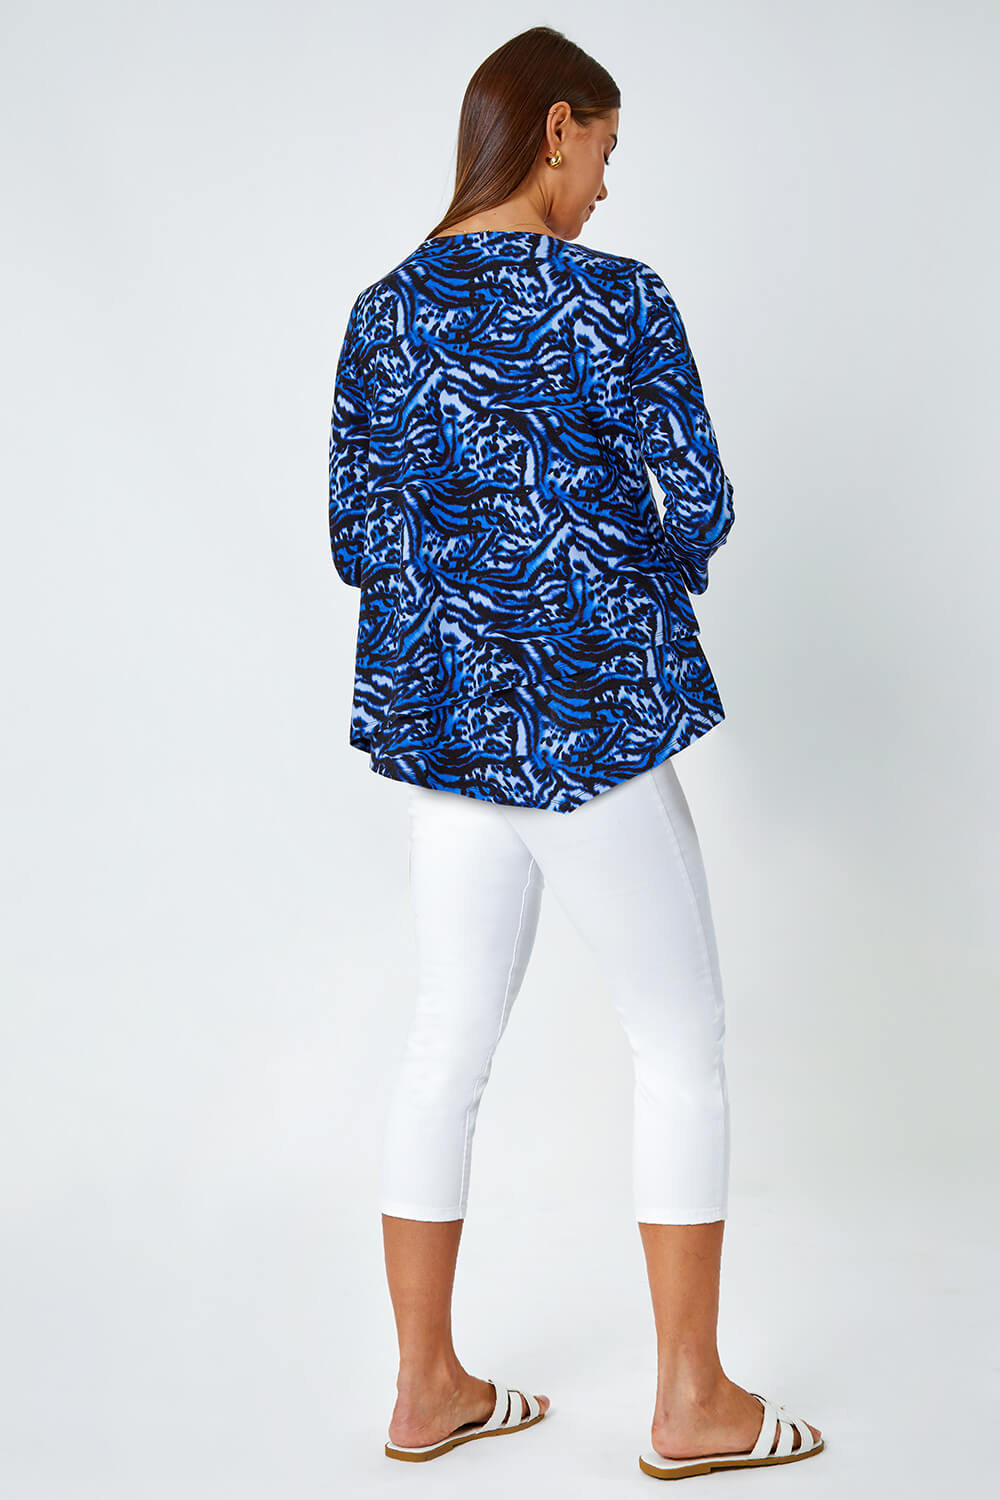 Blue Animal Asymmetric Layer Stretch Top, Image 3 of 5